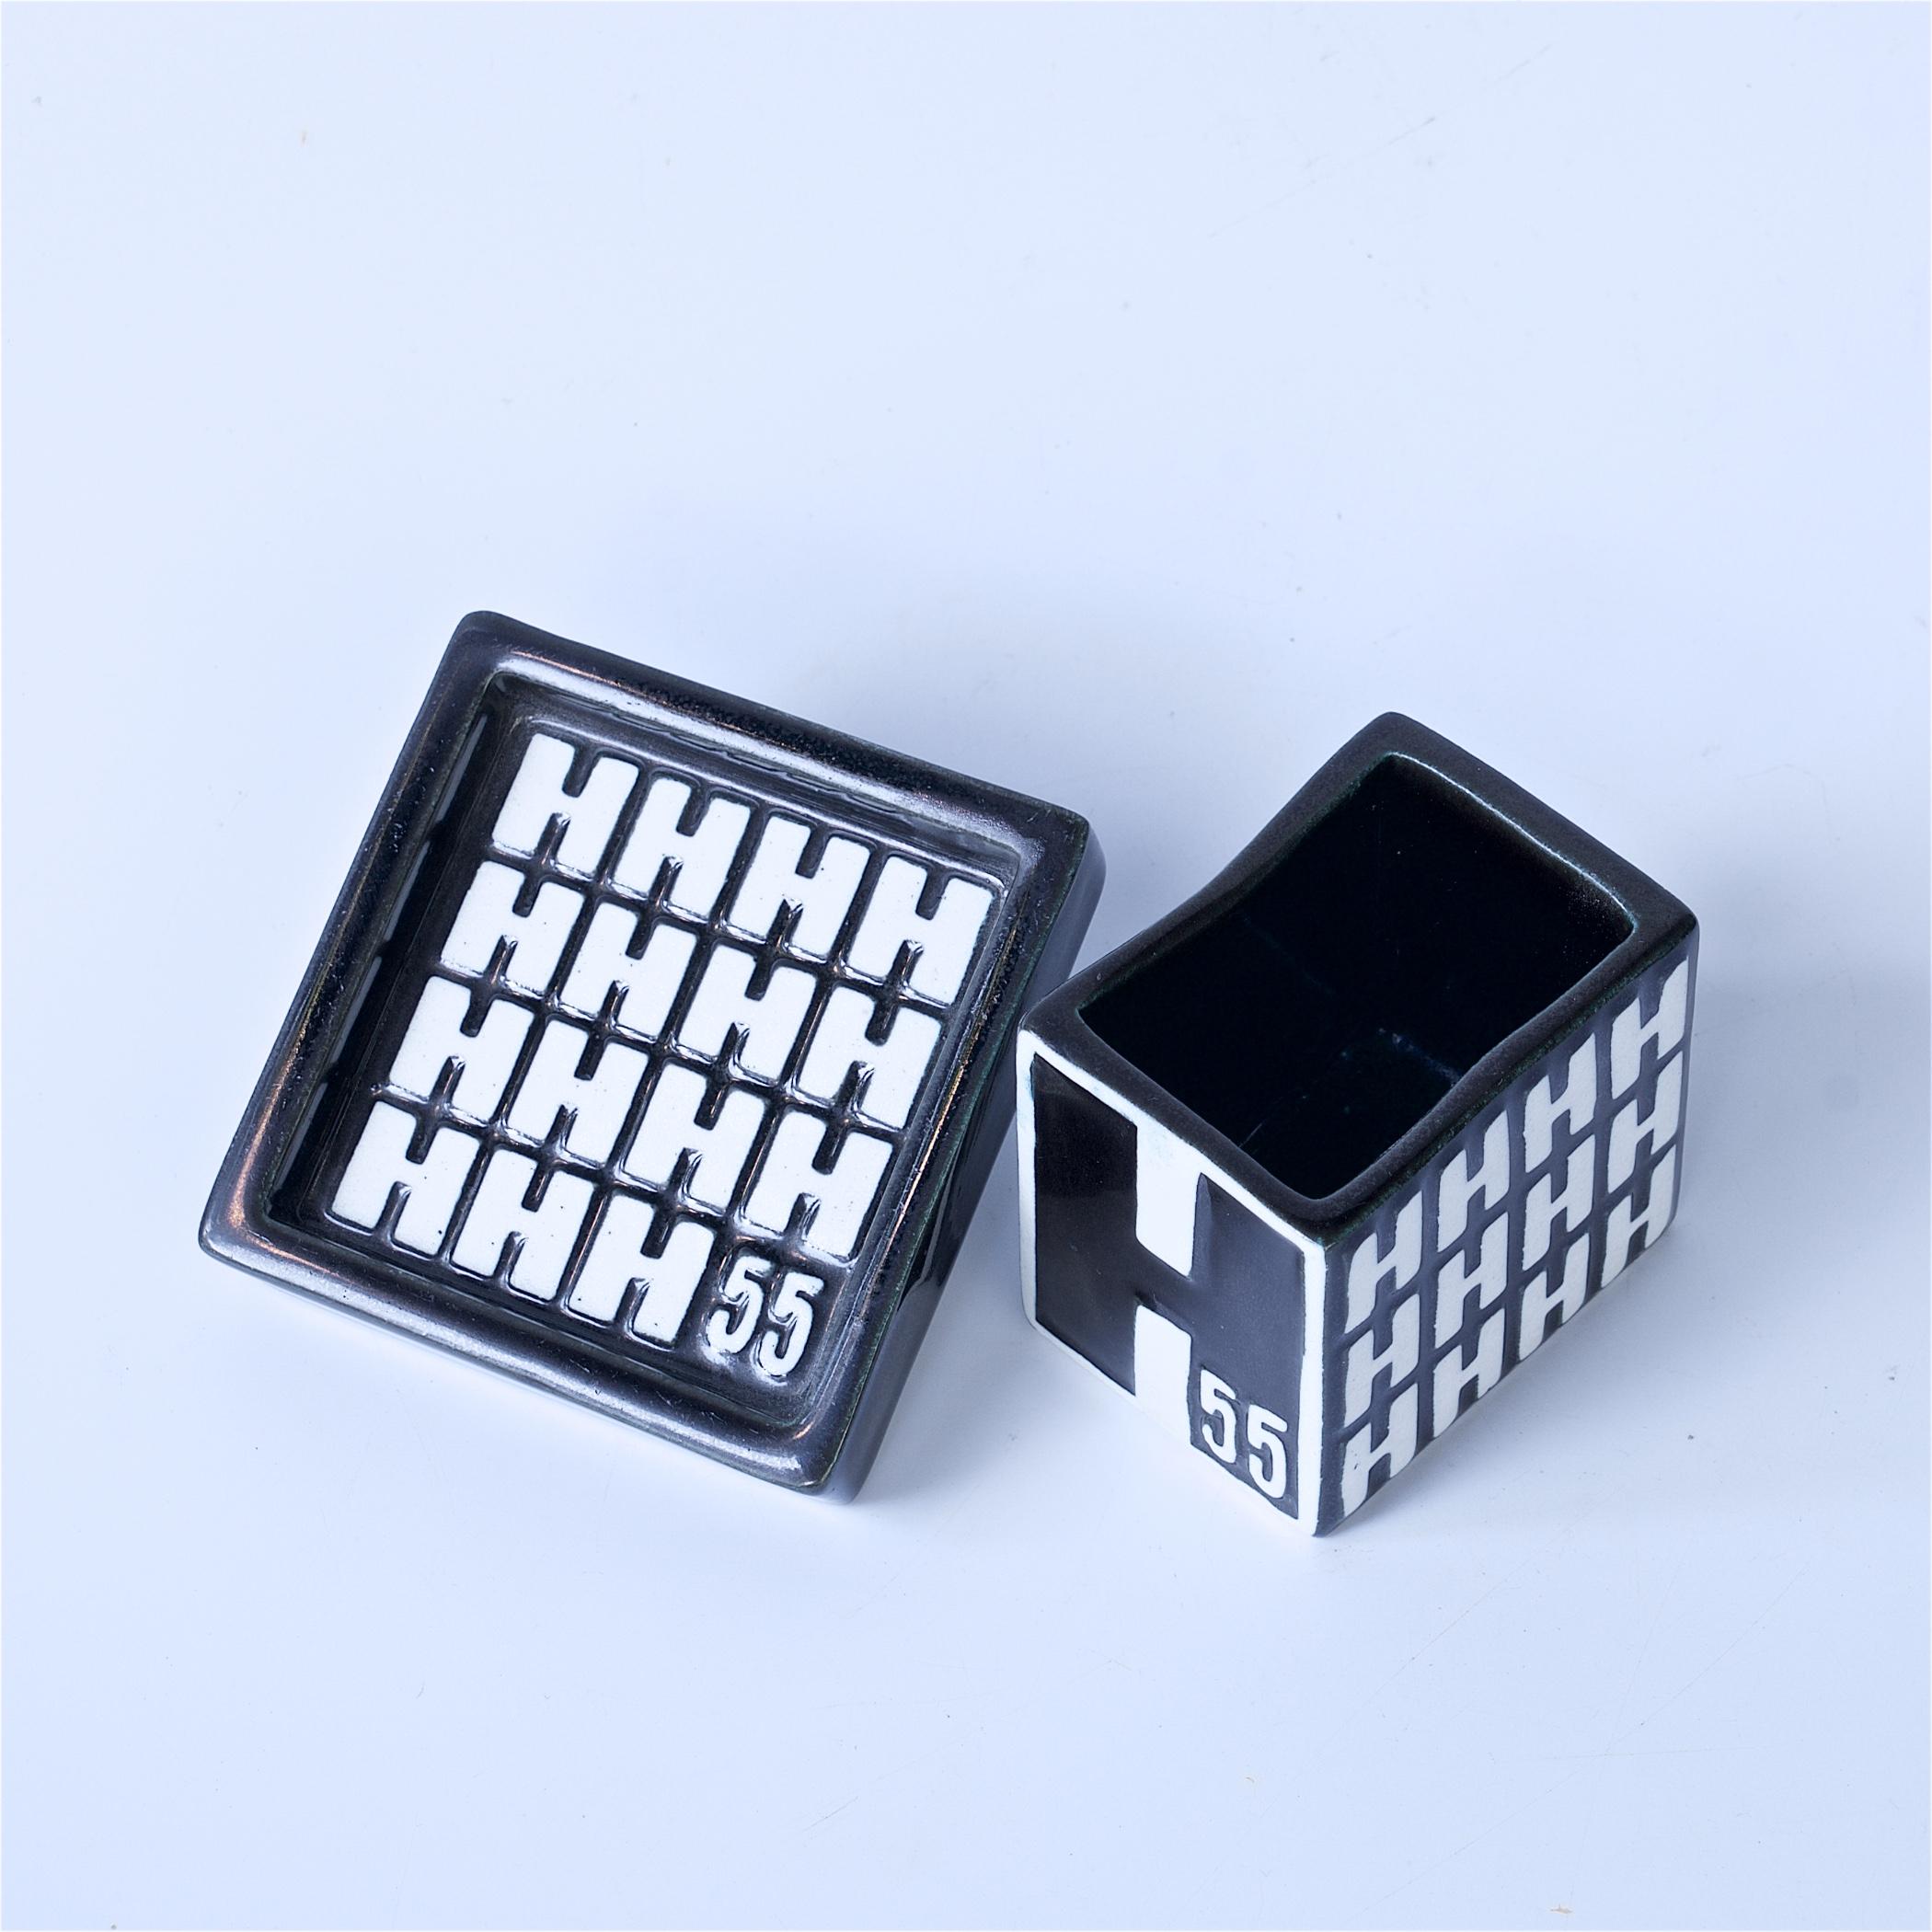 A rare two piece set, commemorating the Helsingborg Exhibition of 1955, and only produced for one year, for this exhibit.  No Gustavsberg collection is complete without something from the H55.

Cigarette Box W: 2.33 x D: 1.75 x H: 2 in.
Ashtray Dish